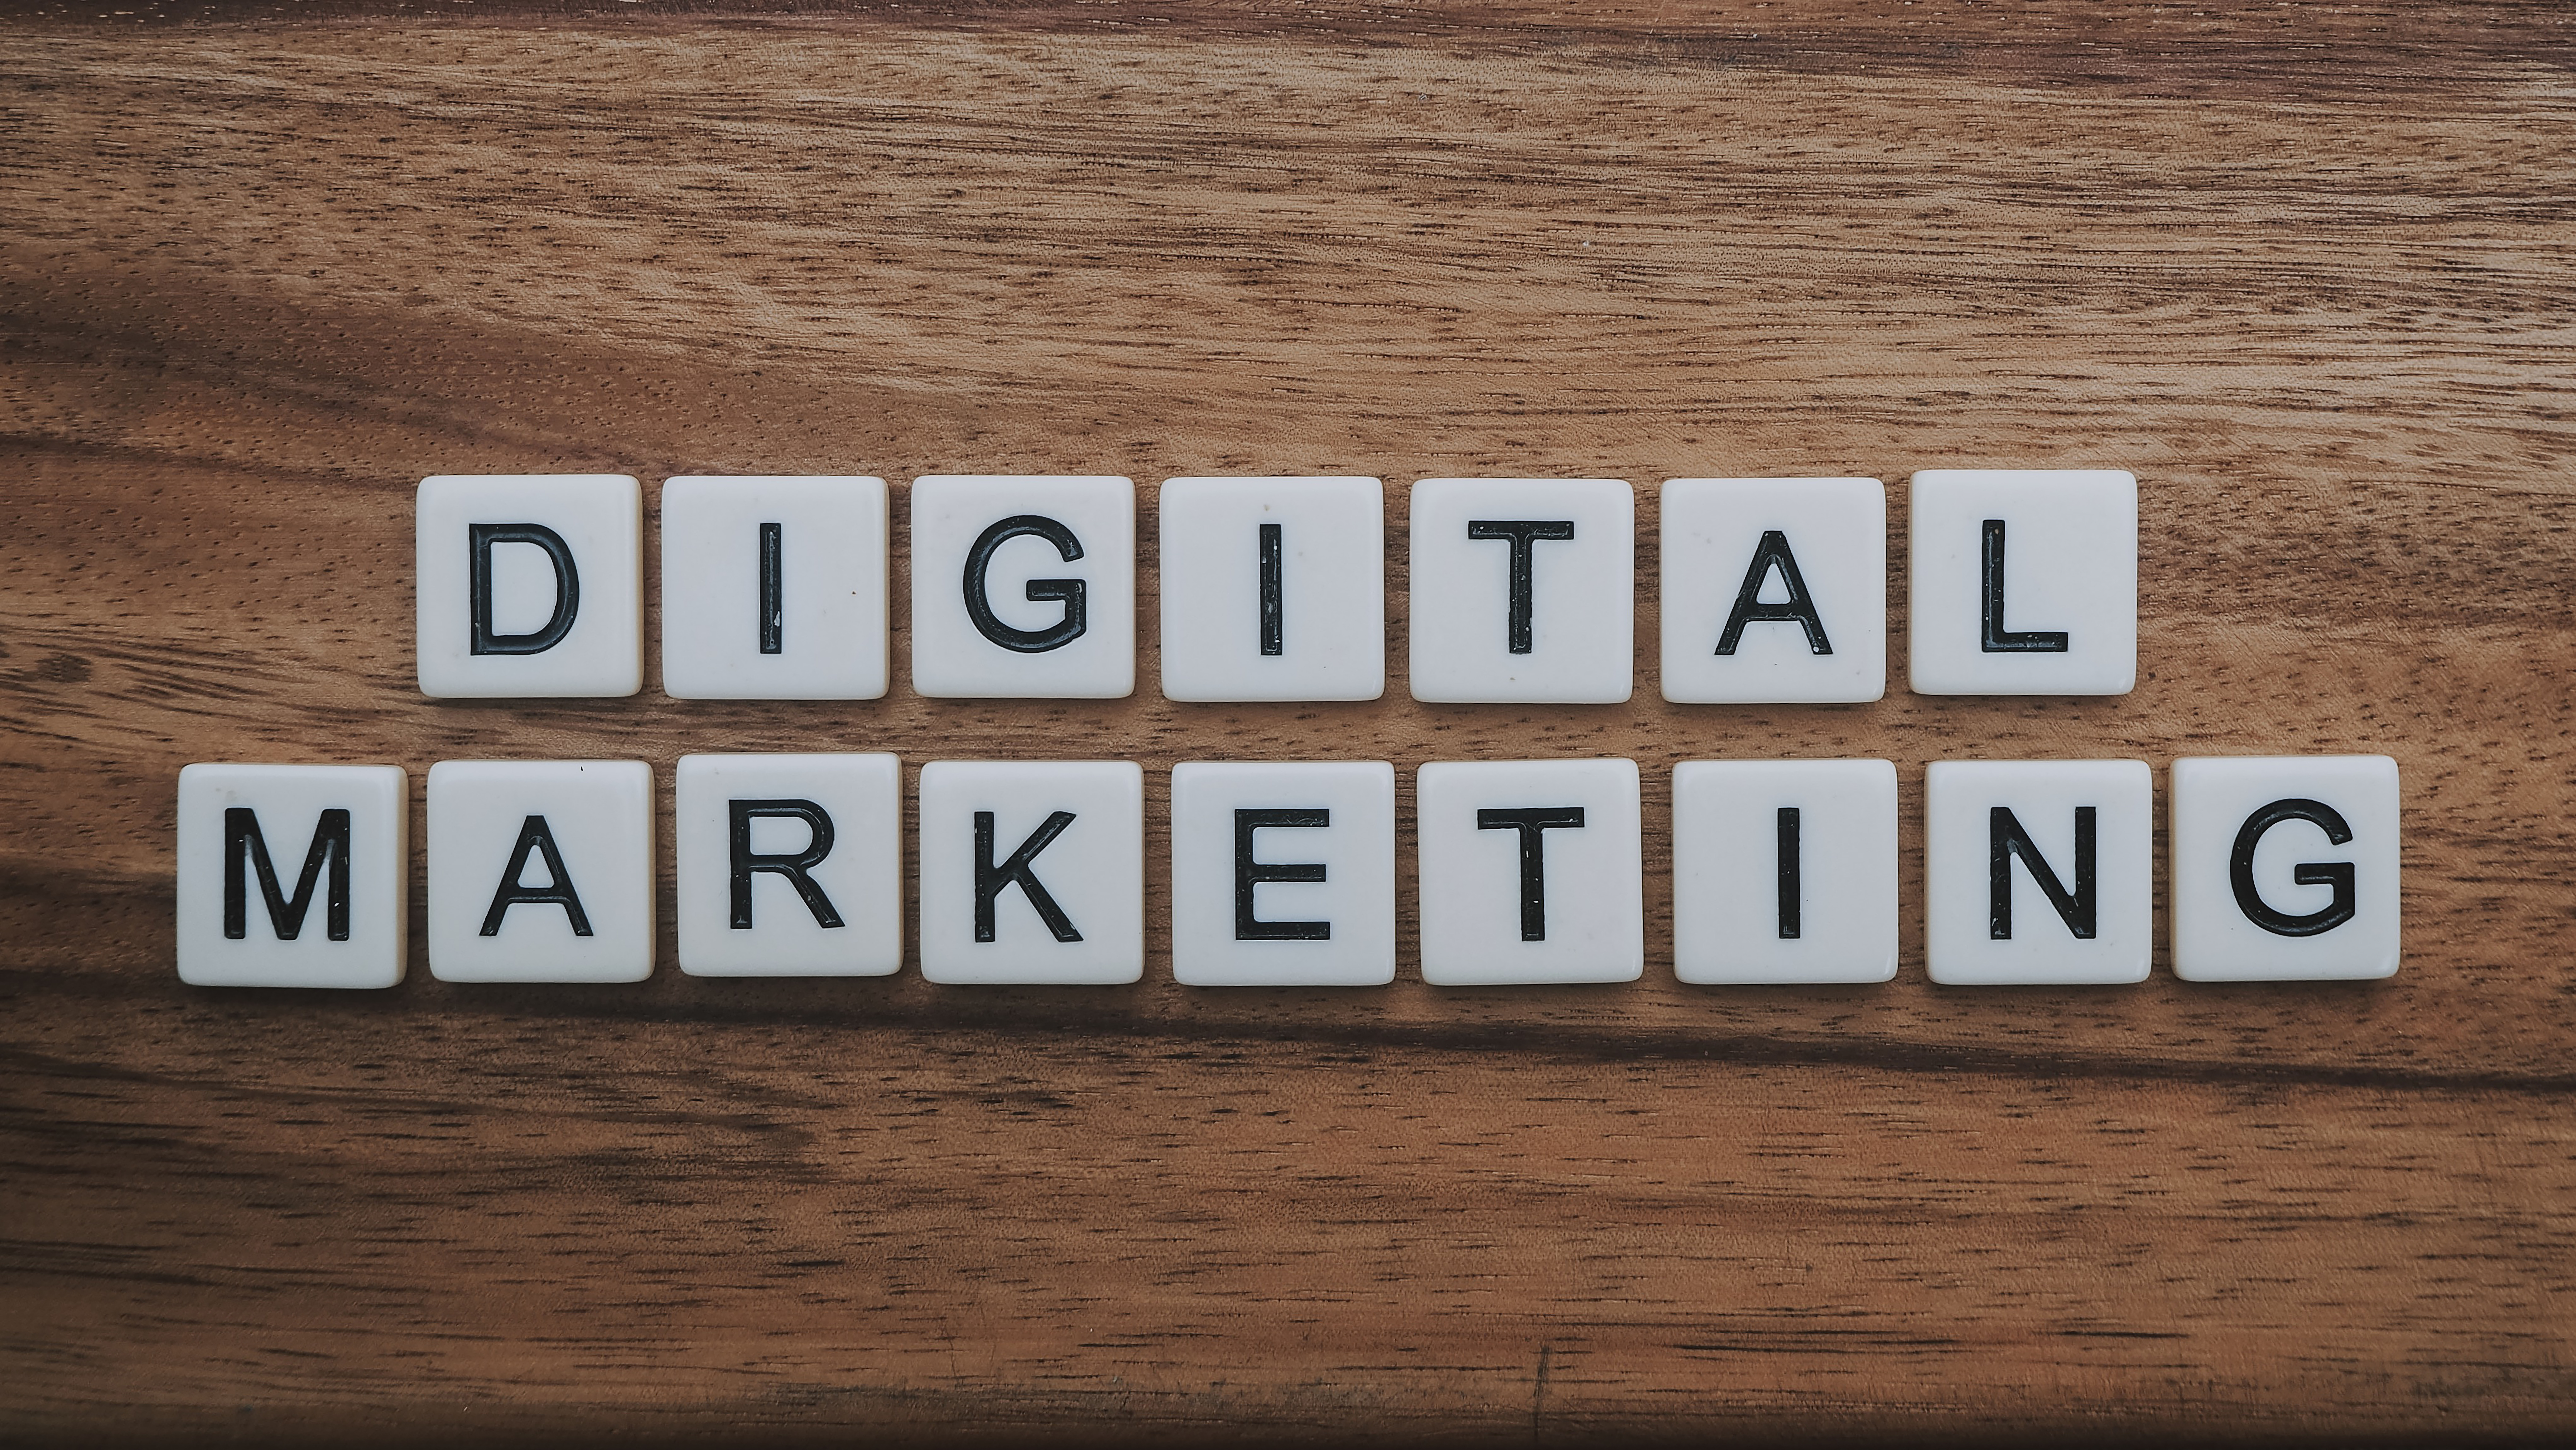 What Are The Different Types Of Digital Marketing?